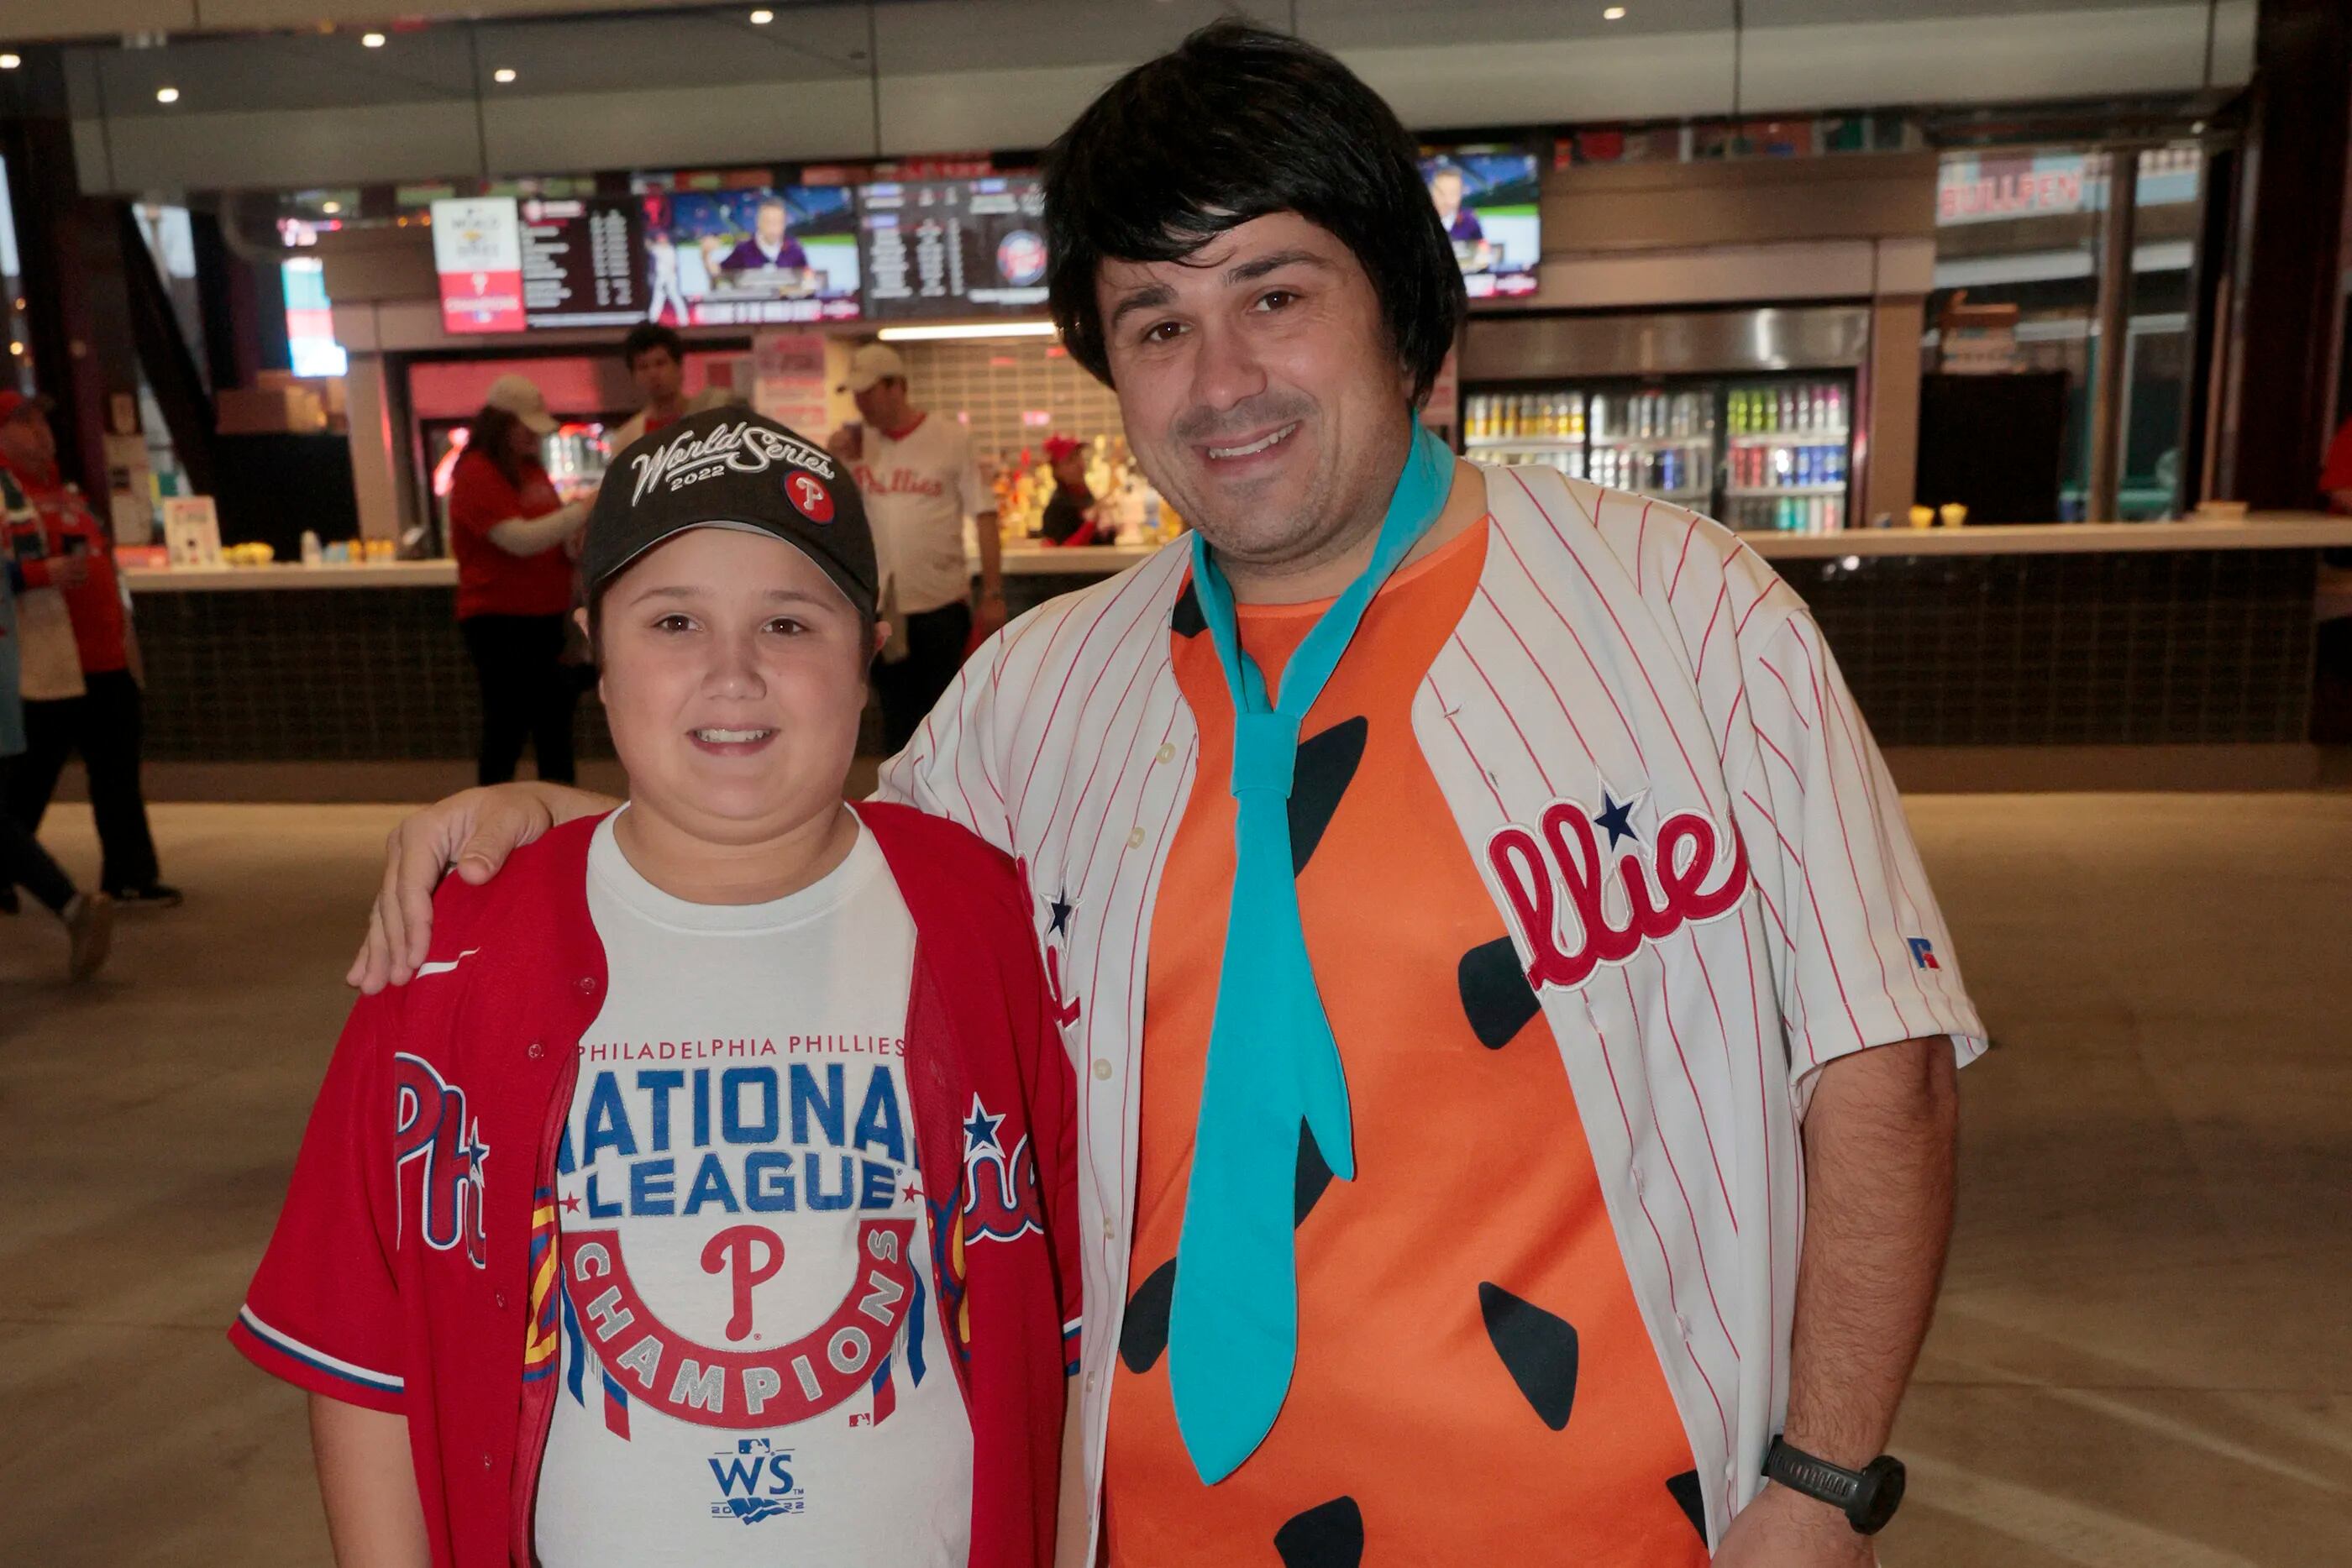 Best costumes at Halloween World Series game that didn't happen